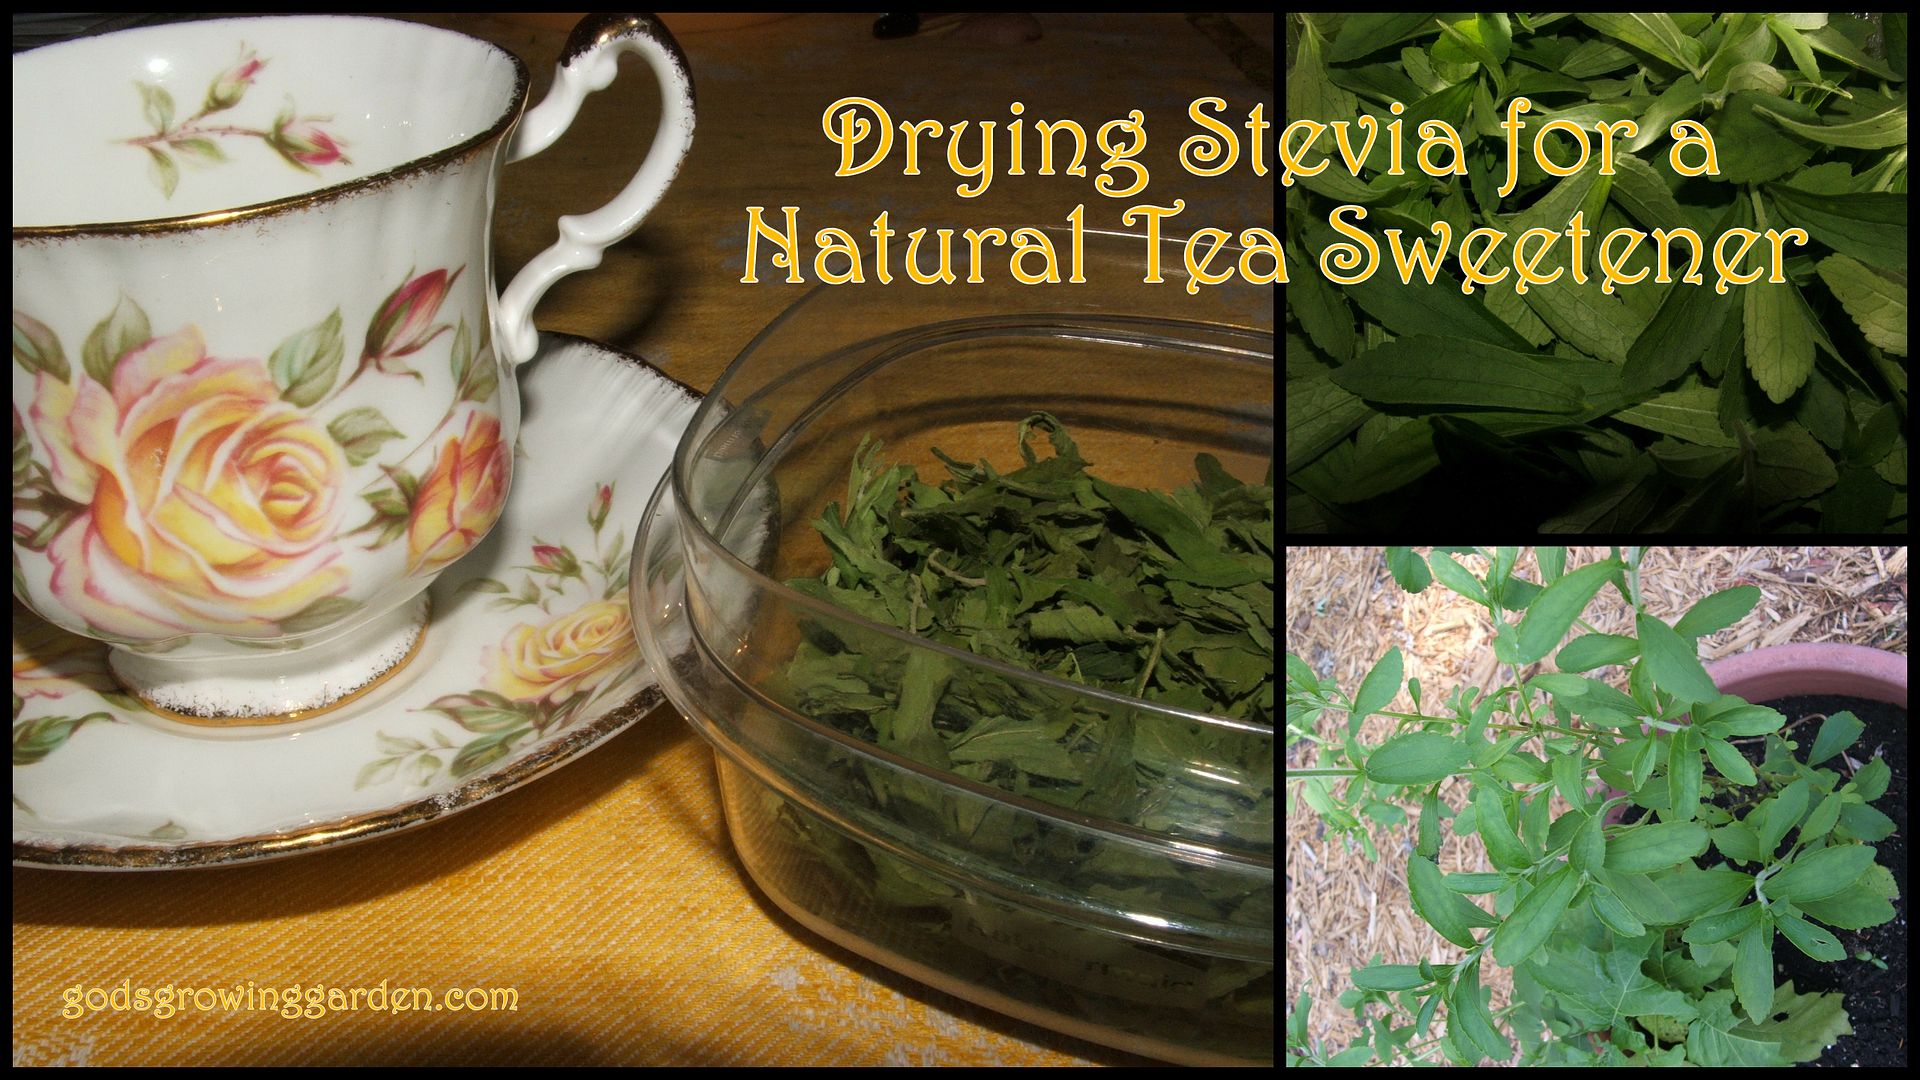 Stevia by Angie Ouellette-Tower for godsgrowinggarden.com photo 2014-10-07_zps908c04c9.jpg